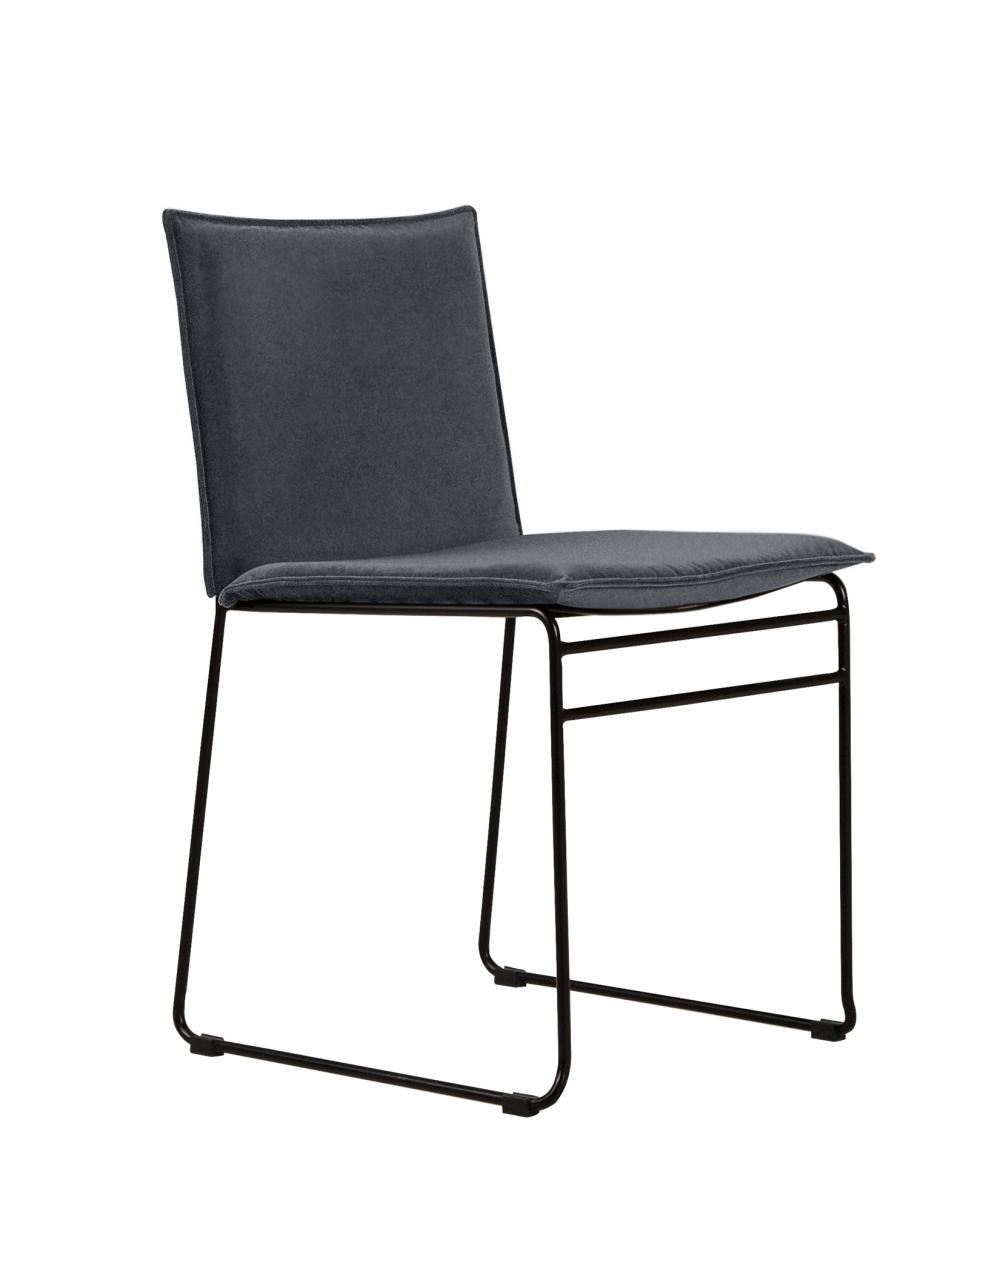 Kyst Dining Chair Outdoor White Steel Chair Black